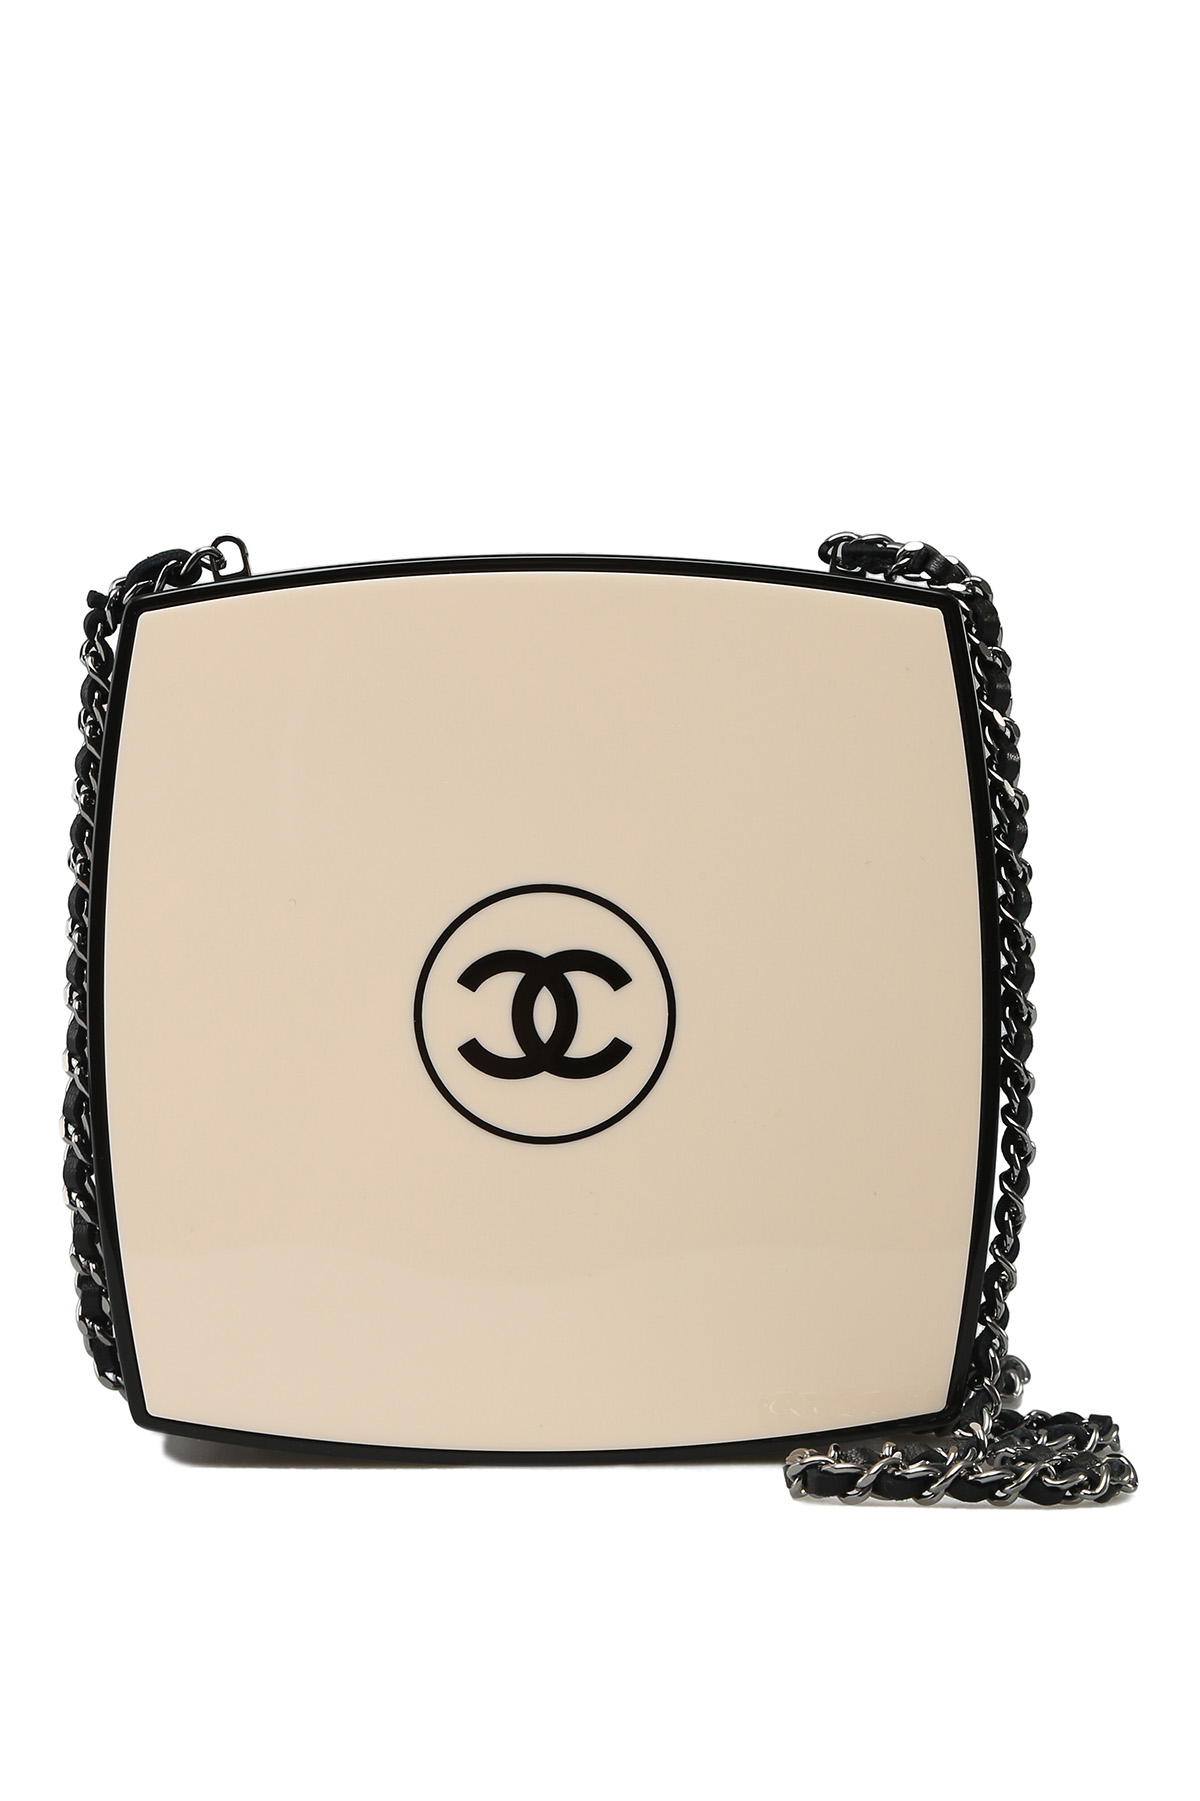 Chanel Limited Edition Compact Powder Minaudière in Ivory & Black  Plexiglass with Silver-Tone Metal Hardware